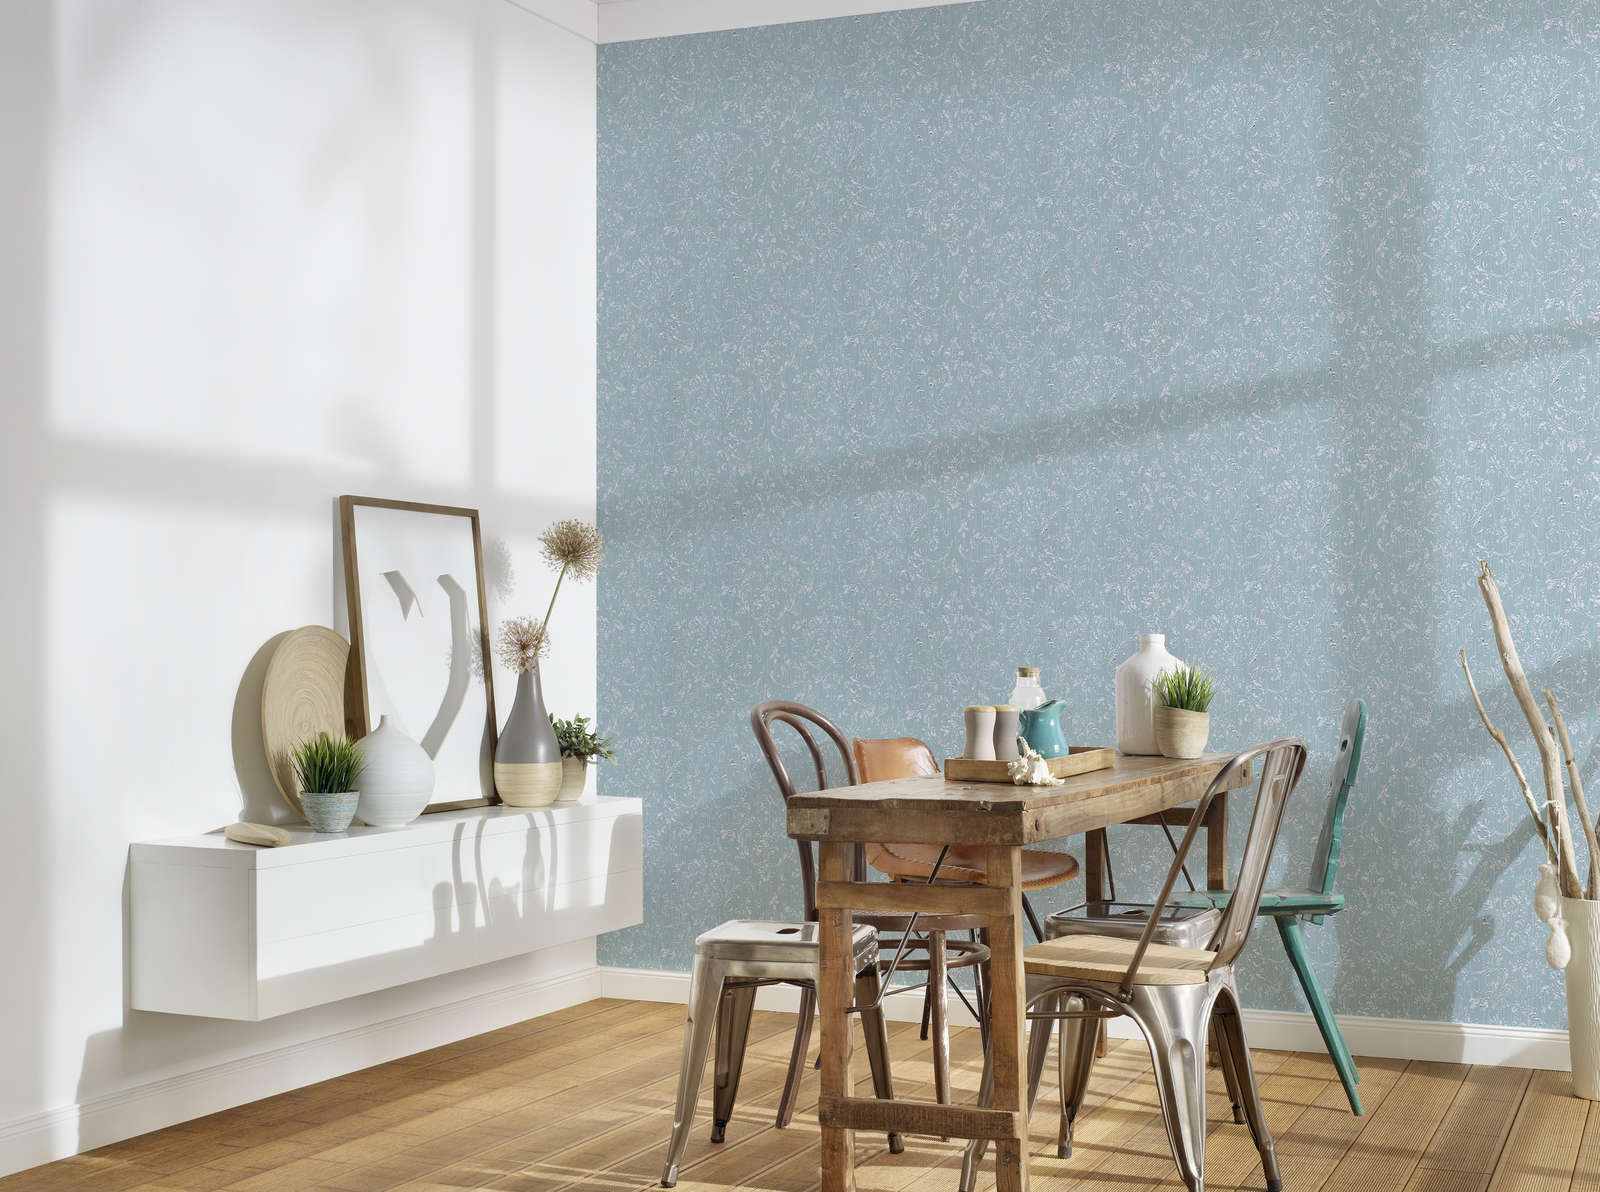             Wallpaper with silver ornaments in used look - blue, green
        